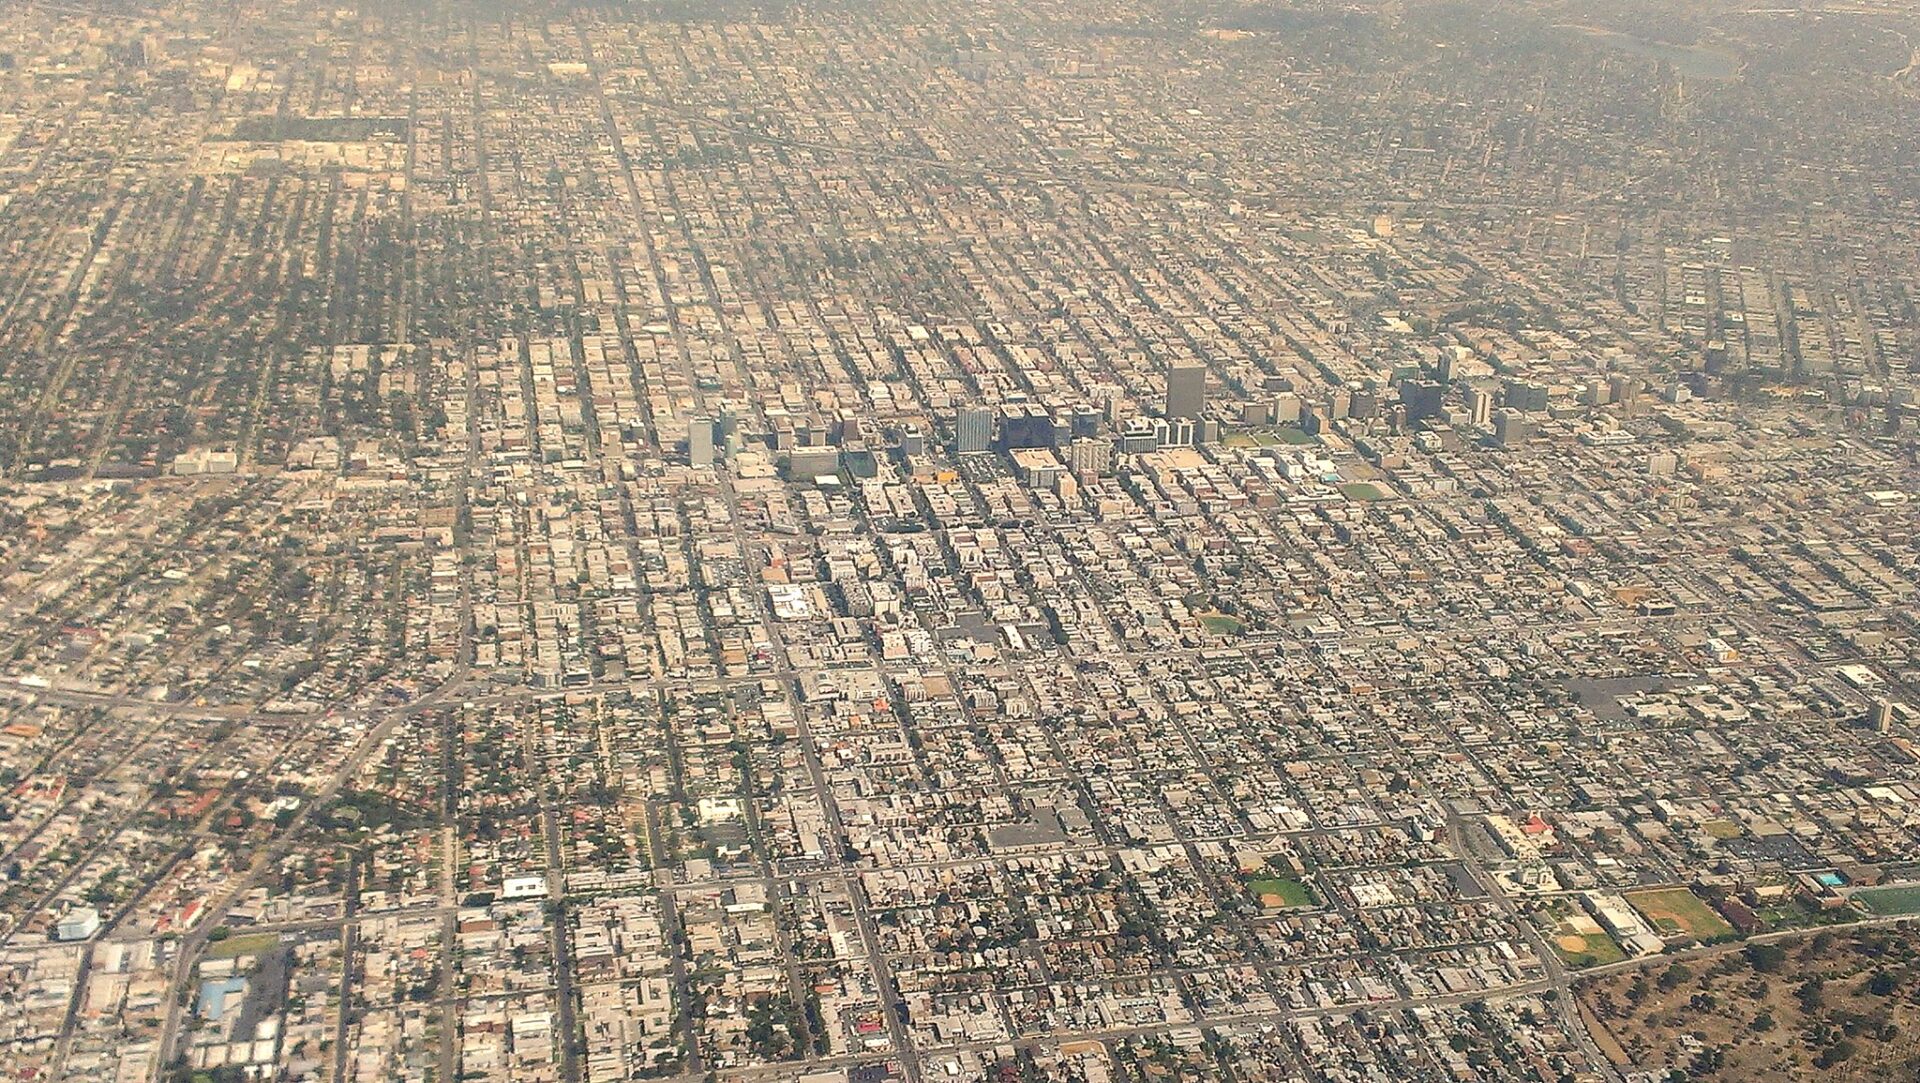 Los Angeles from the air, rooftops as far as the eye can see